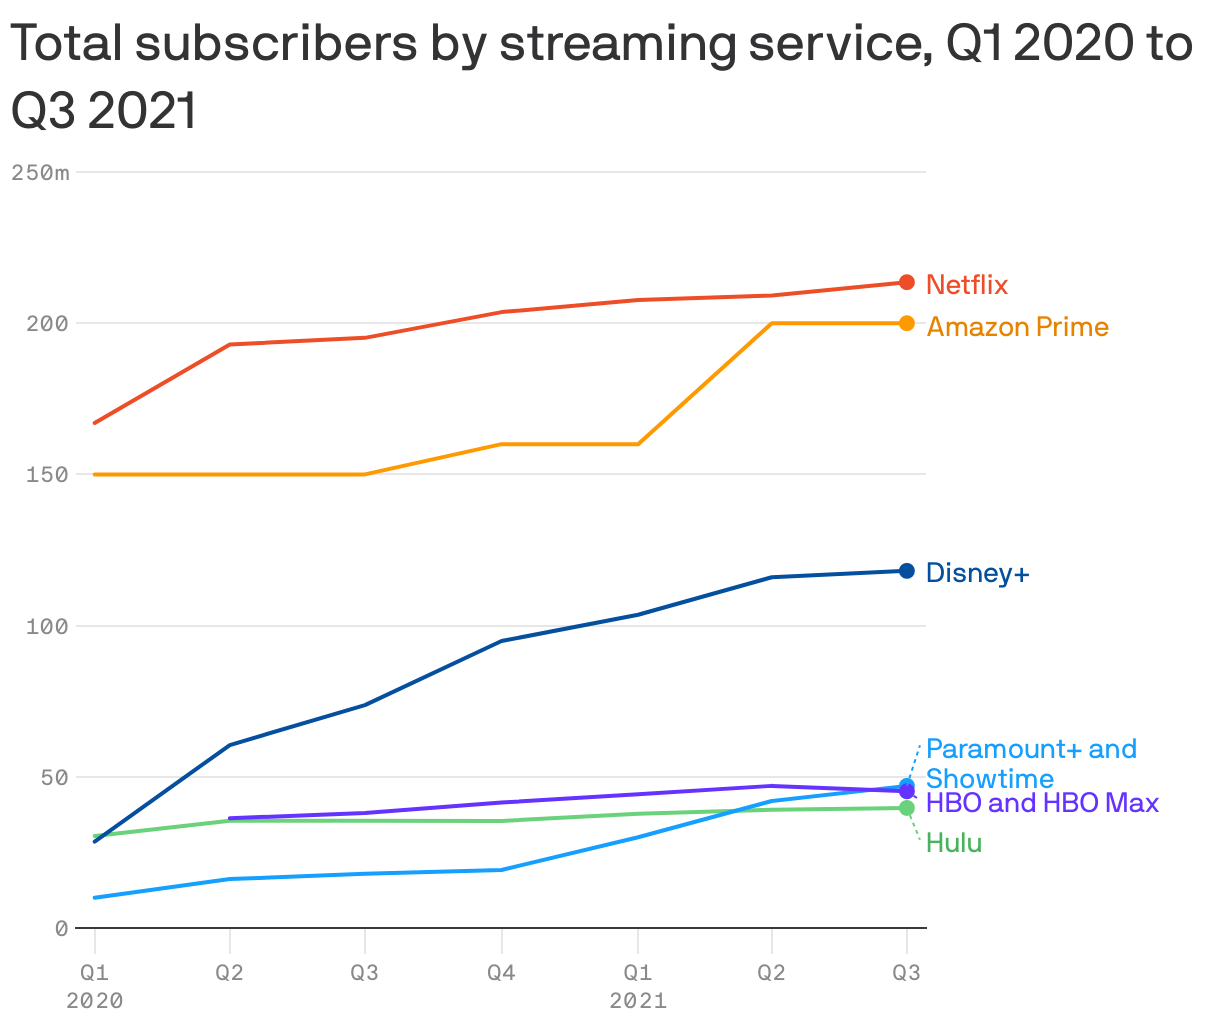 Total subscribers by streaming service, Q1 2020 to Q3 2021